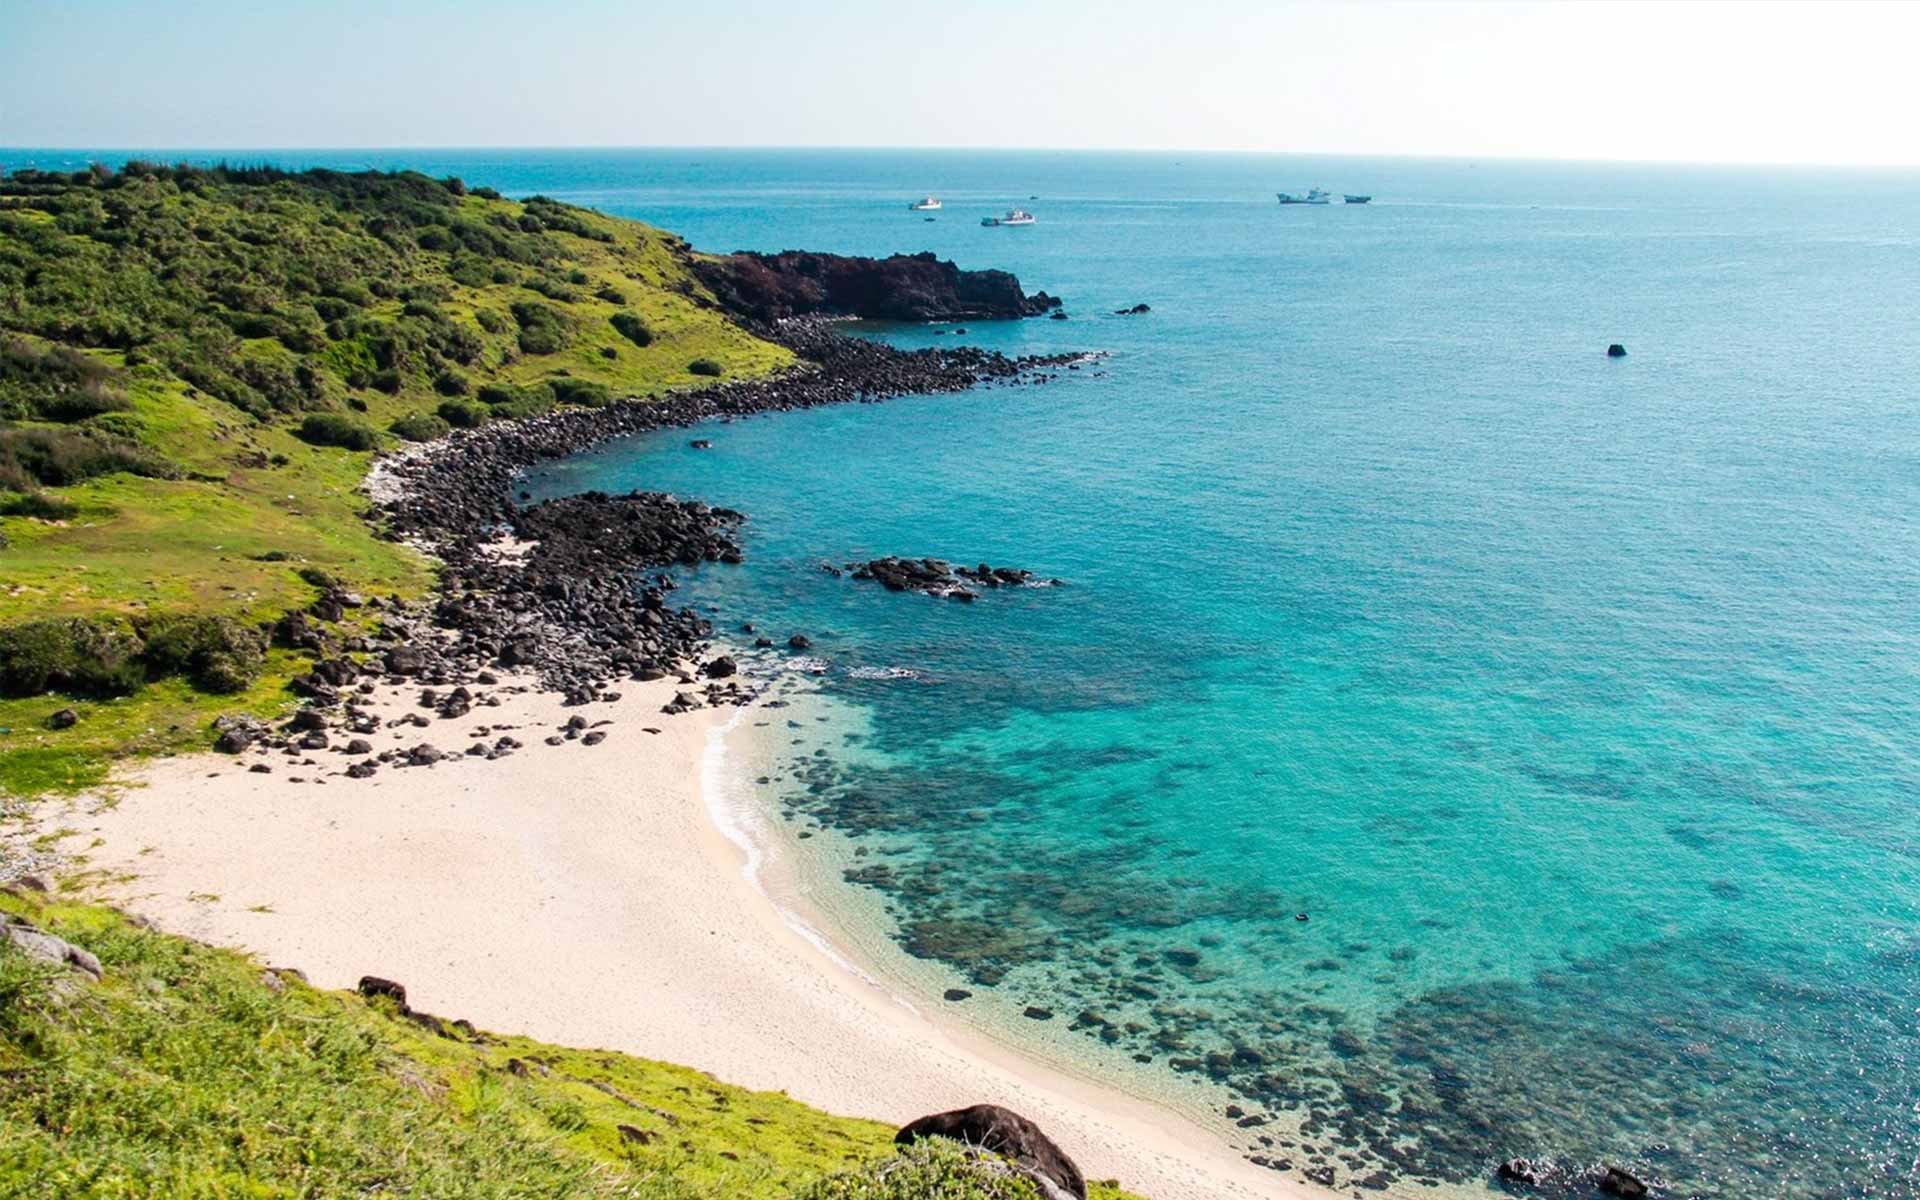 Vietnam’s Islands appealing to foreign travelers